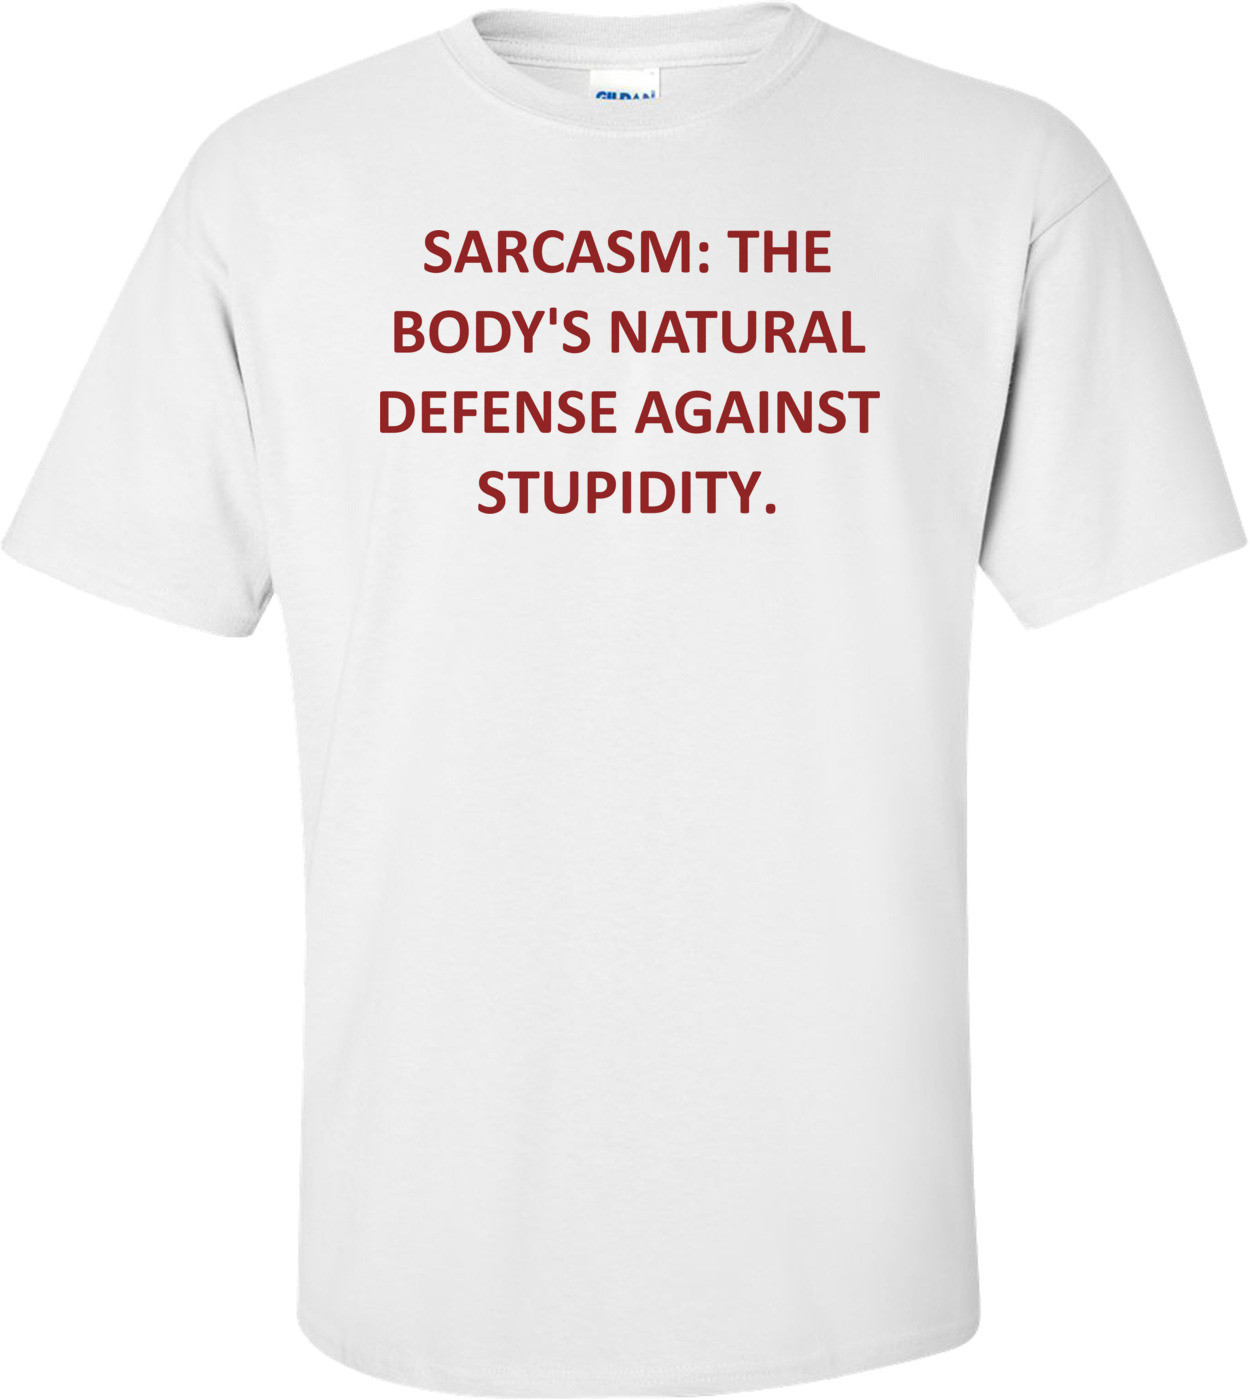 SARCASM: THE BODY'S NATURAL DEFENSE AGAINST STUPIDITY.